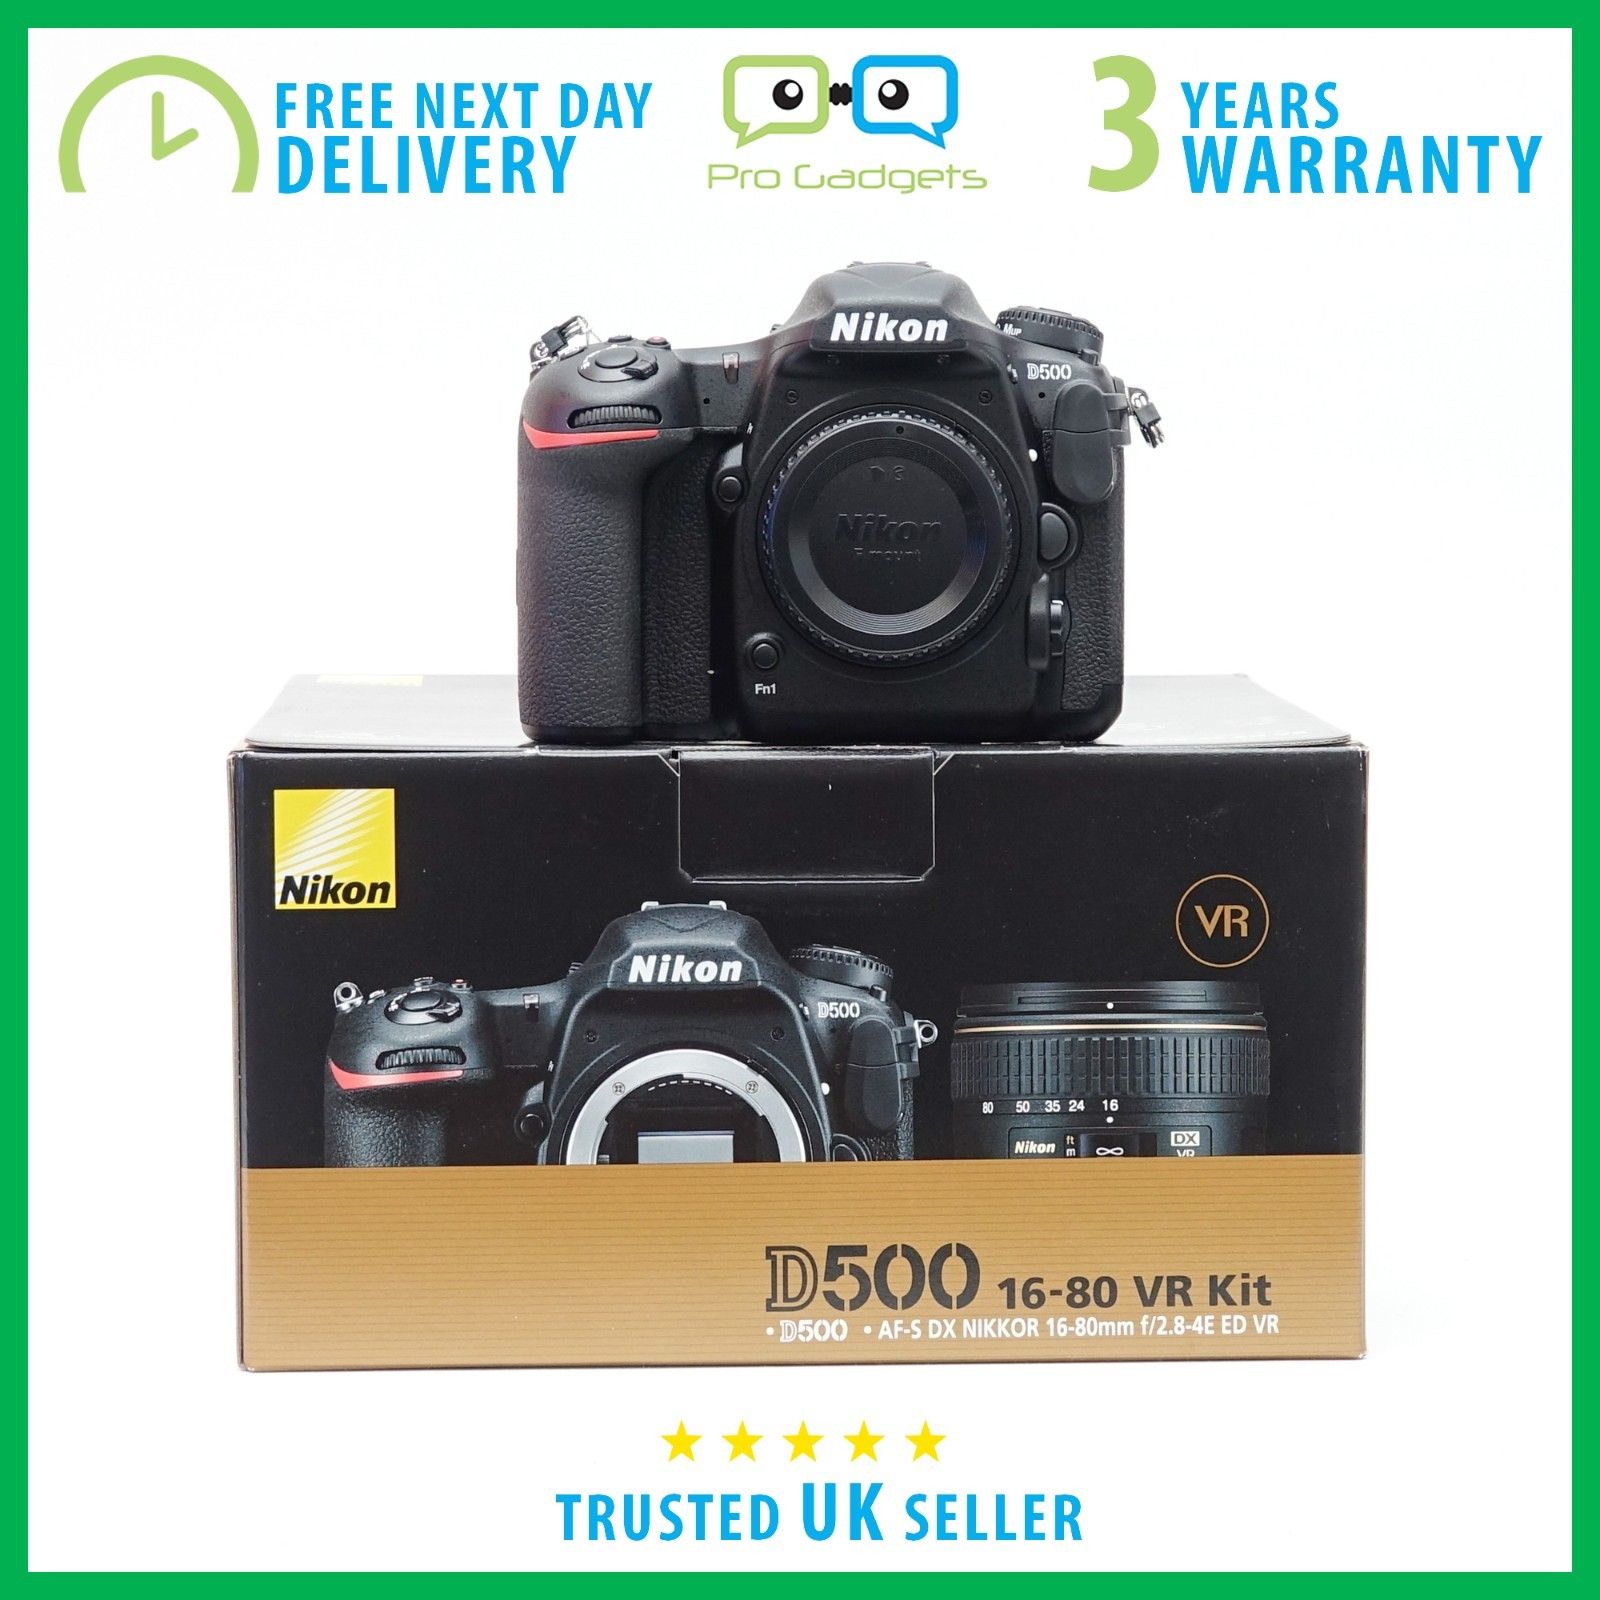 New Nikon D500 20.9MP Body Only Kit Box - 3 Year Warranty - Multiple Languages